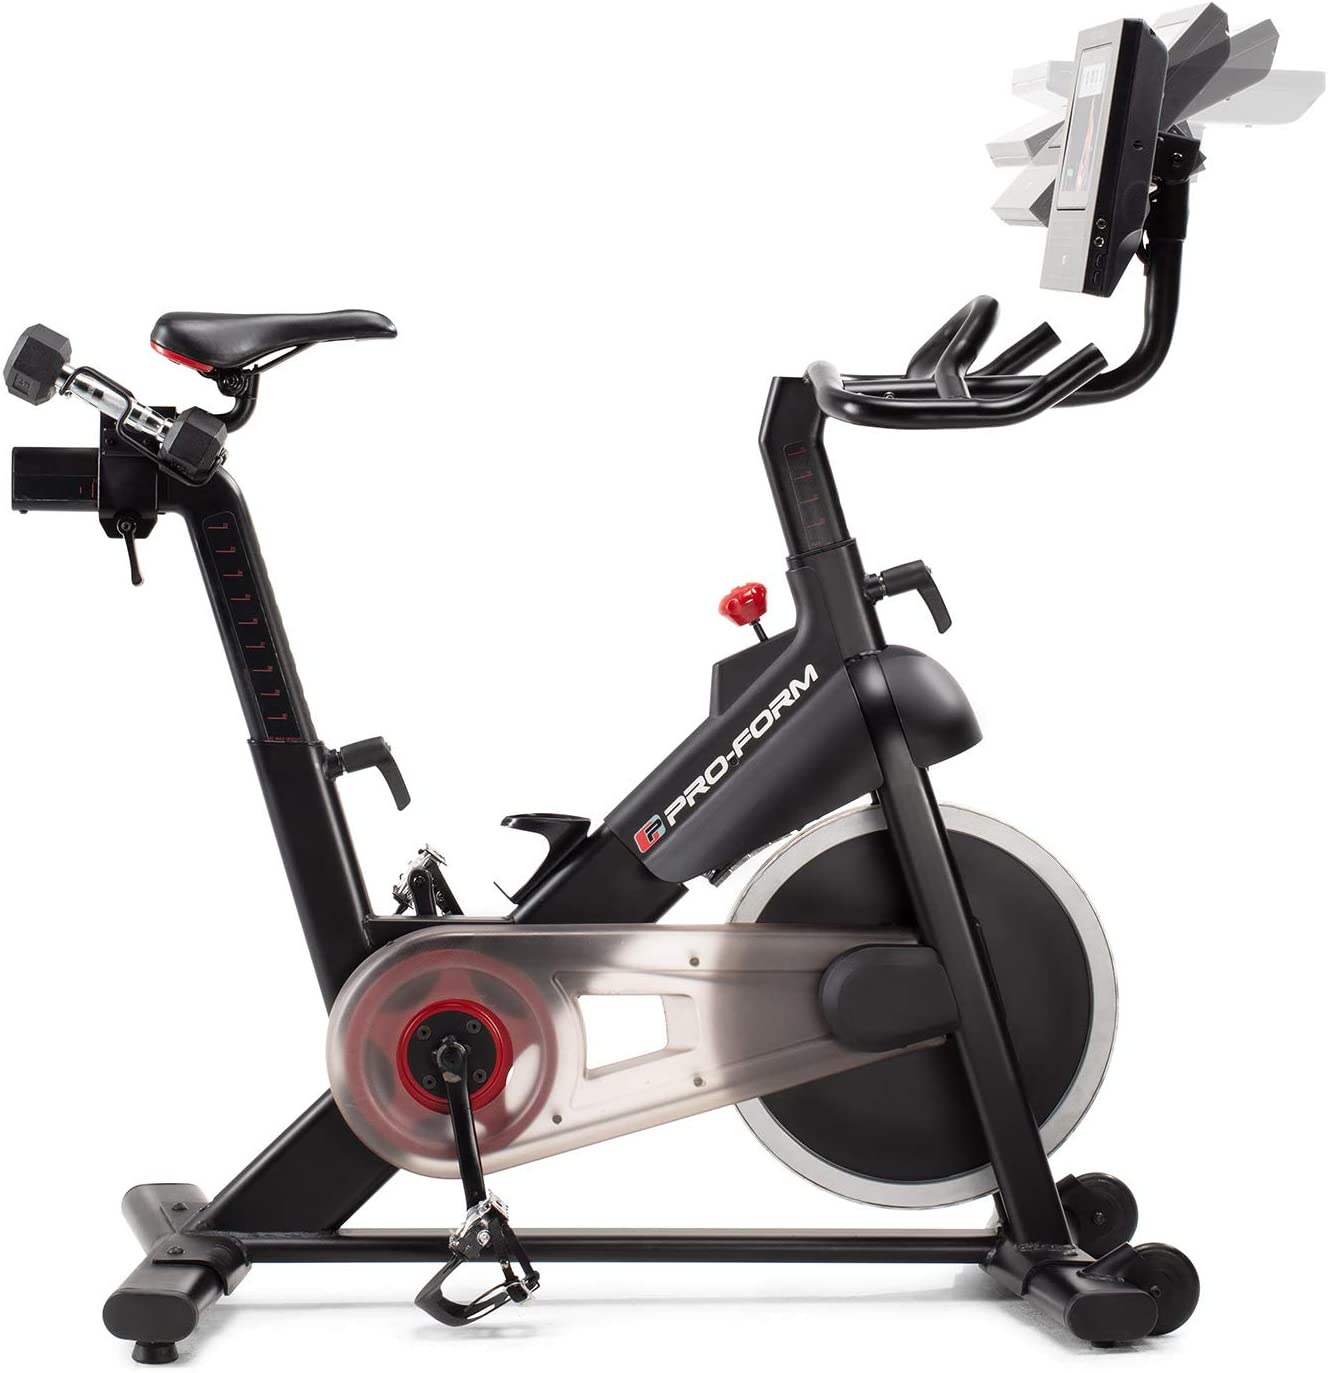 Proform Smart Power 10.0 Exercise Bike - Side view 2